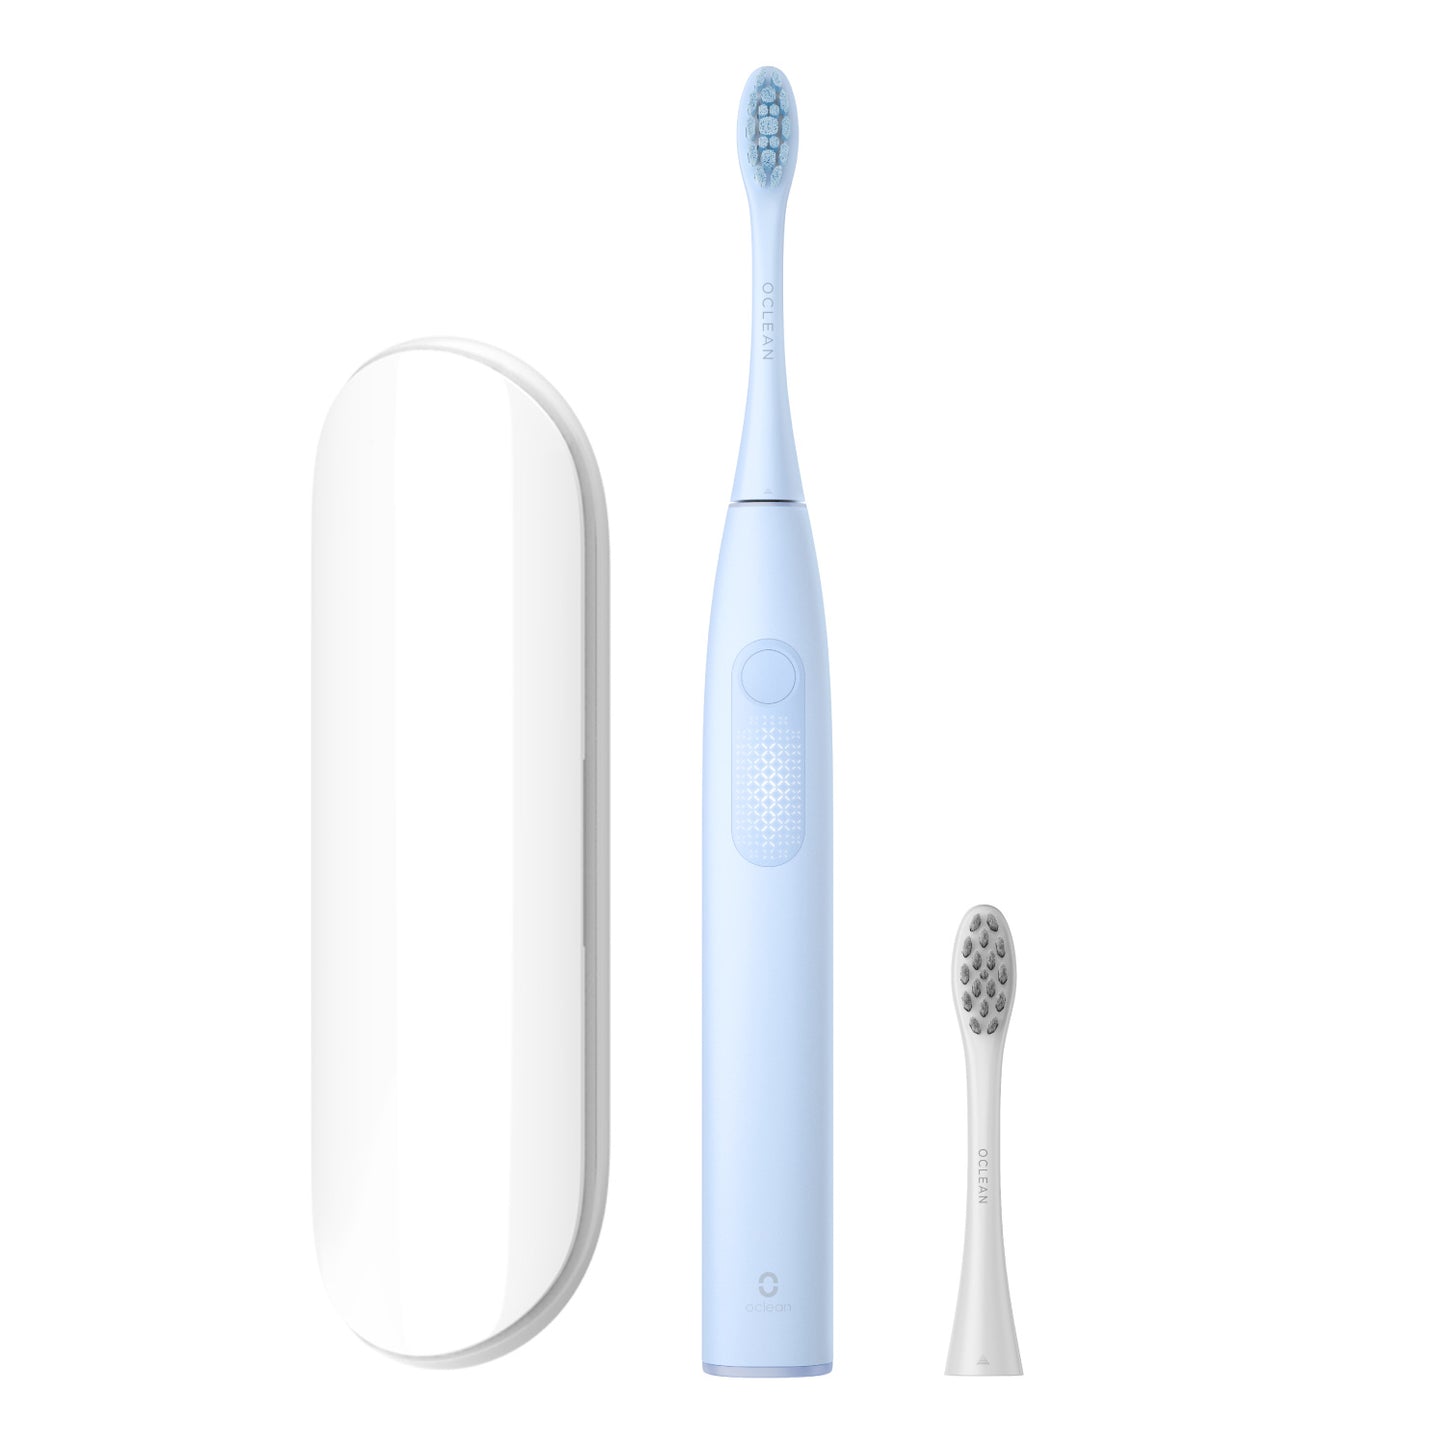 Oclean F1 Sonic Electric Toothbrush Toothbrushes Blue  Oclean US Store